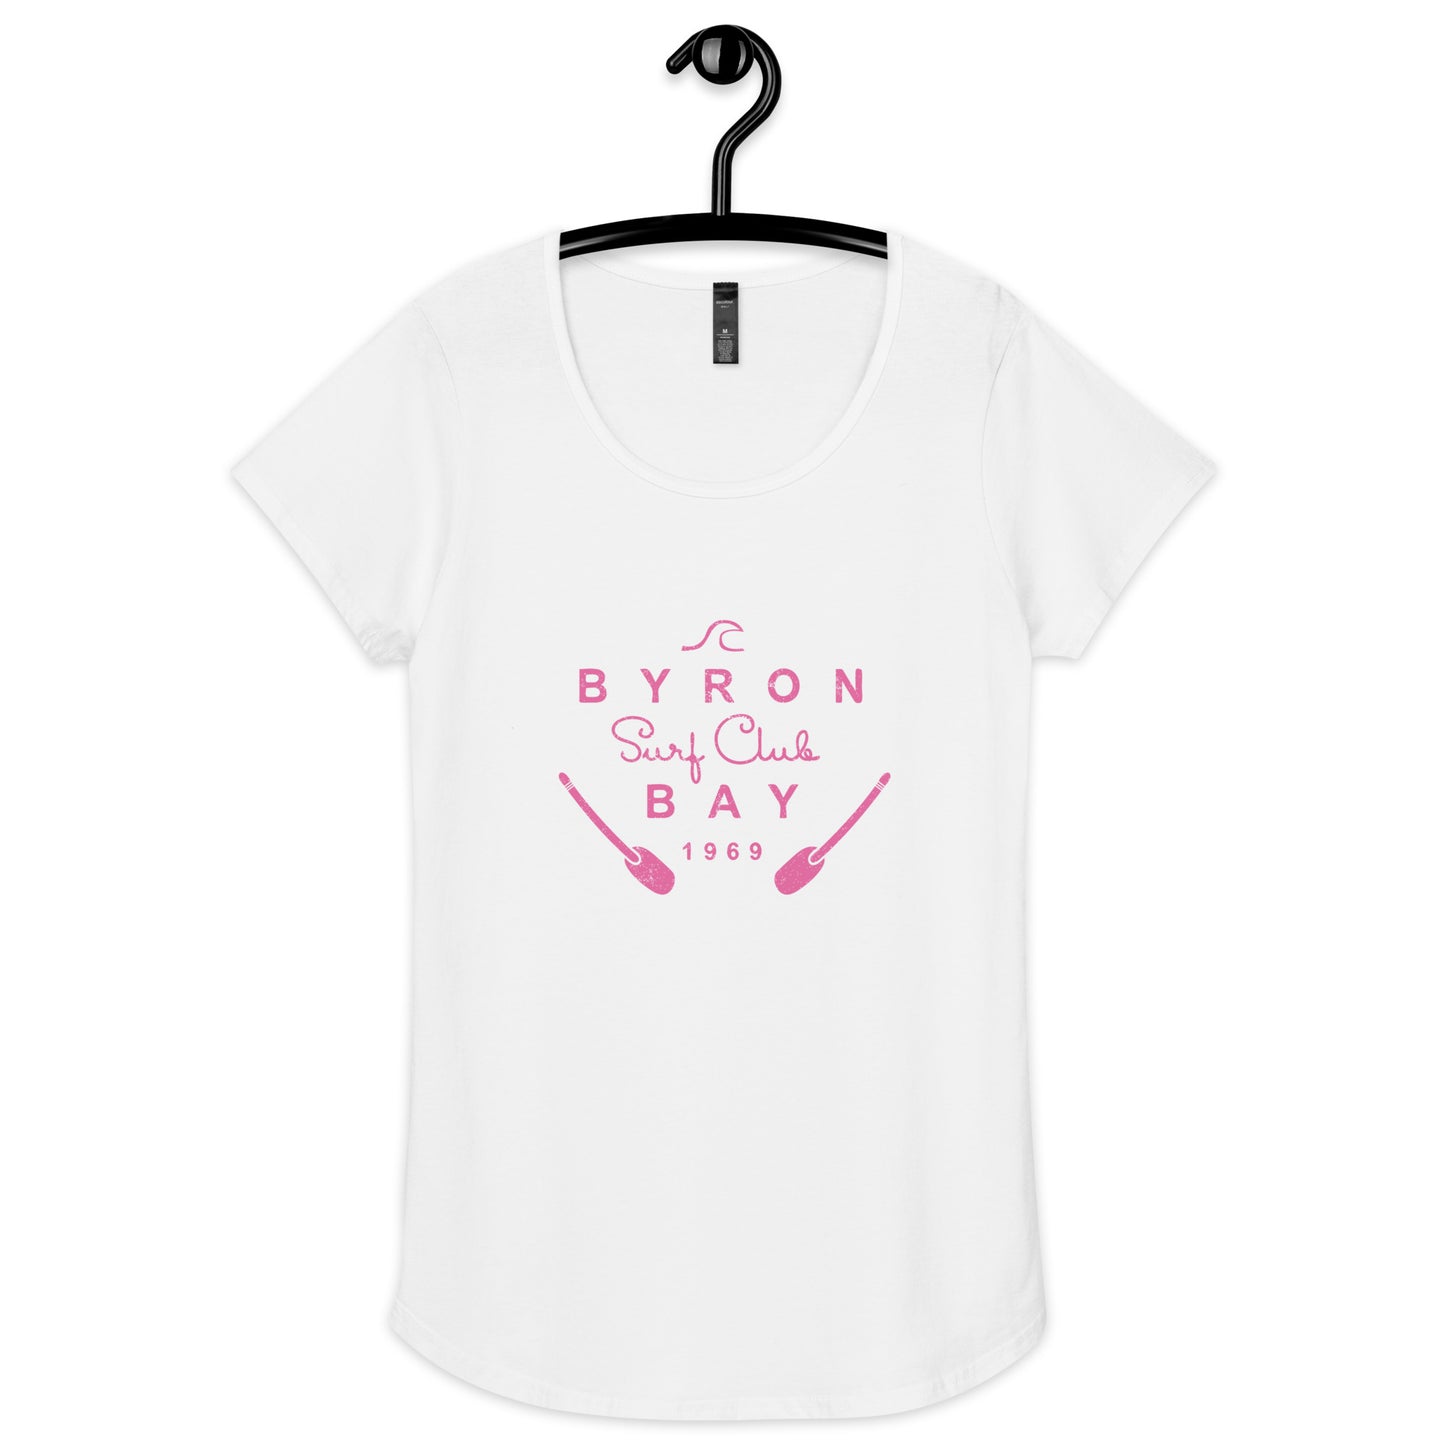  Women’s Round Neck Tee - White - Front flat lay view - pink Byron Bay Surf Club logo on front - Genuine Byron Bay Merchandise | Produced by Go Sea Kayak Byron Bay 